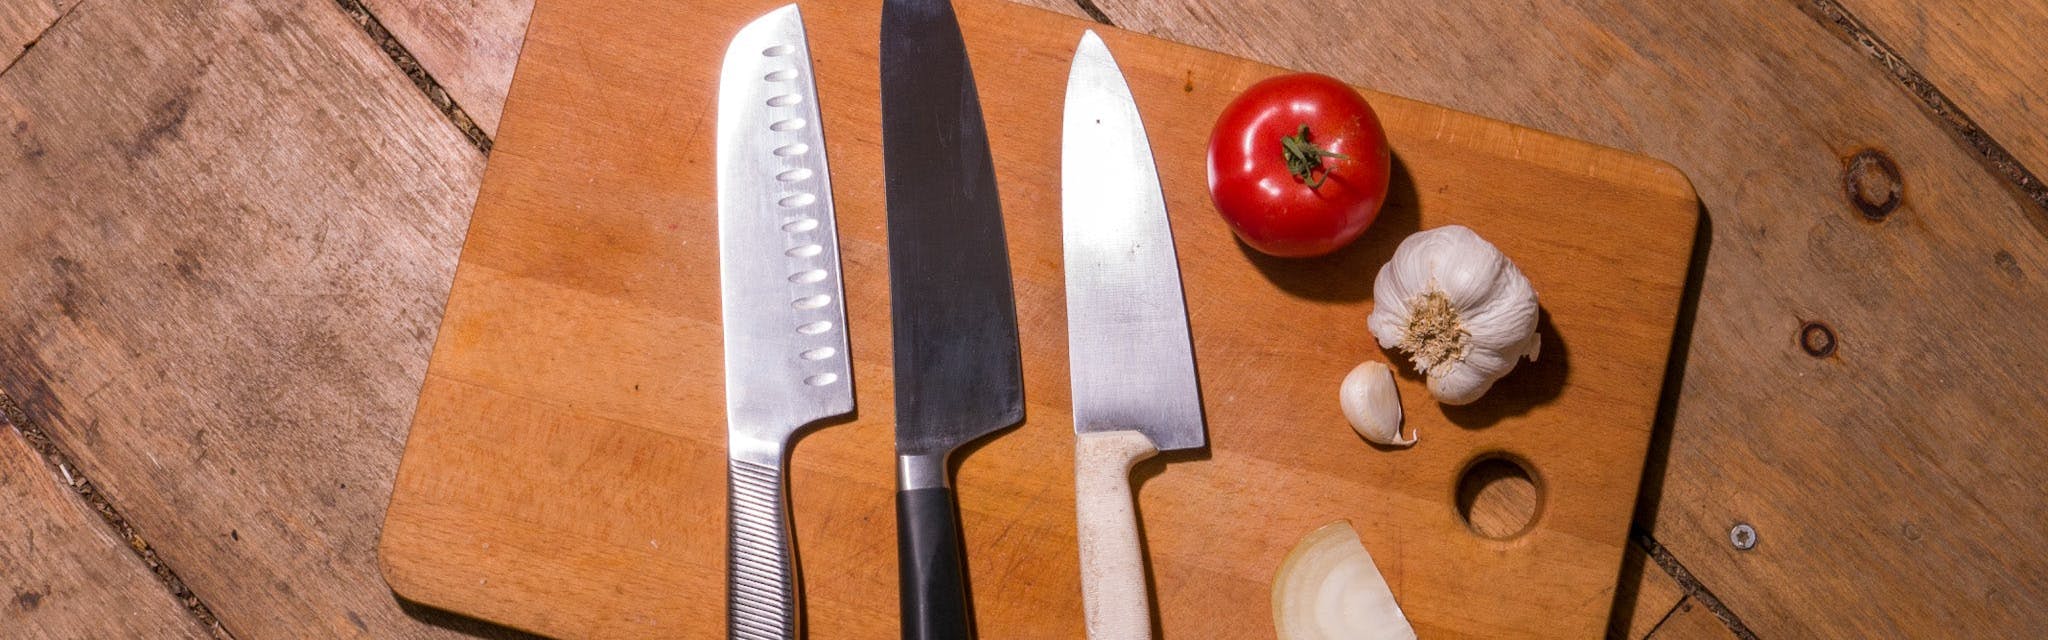 Three knives in a row on a cutting board. There is a tomato and some garlic on the cutting board also. 